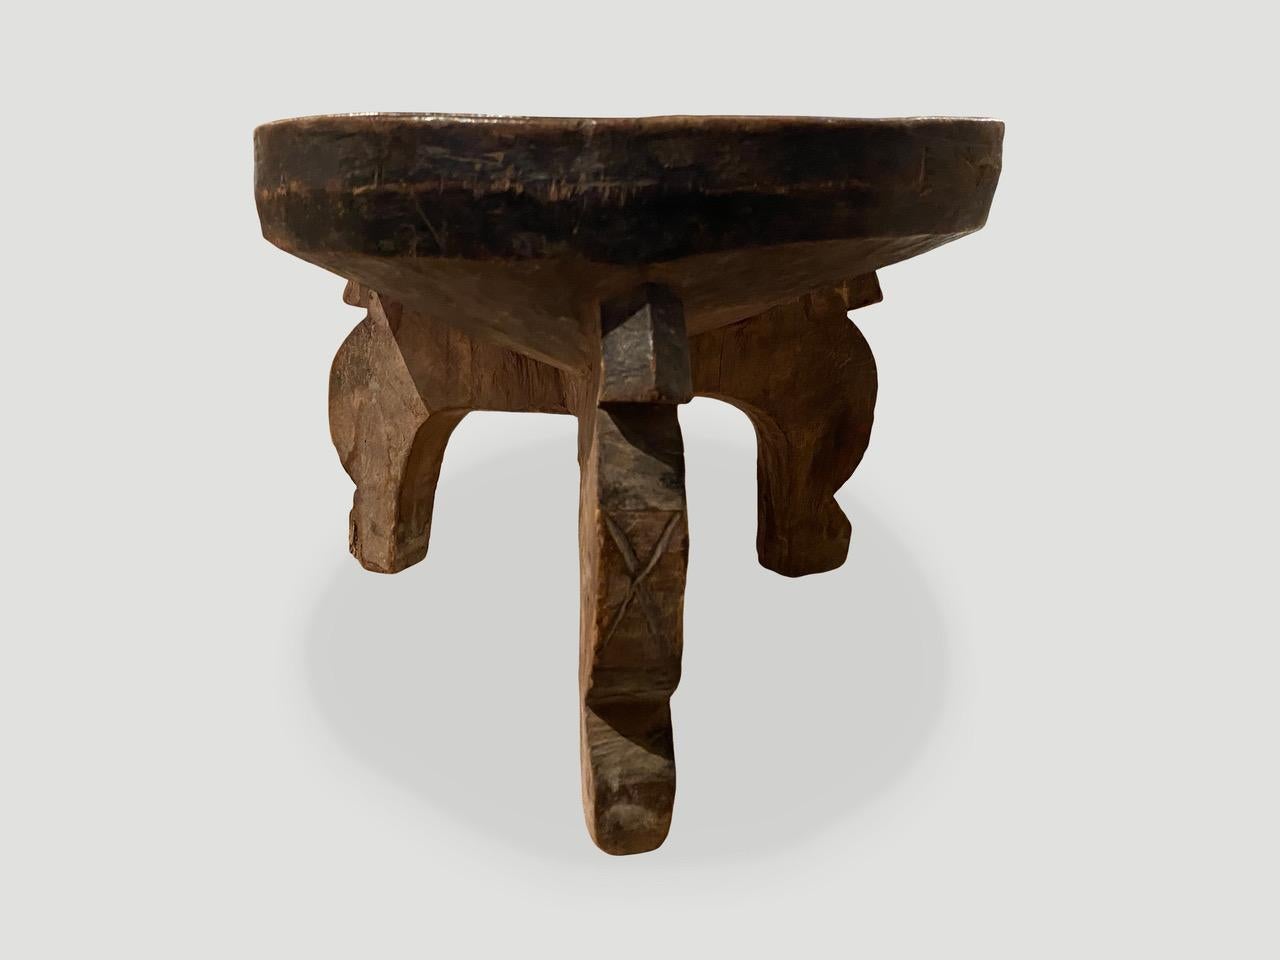 Beautiful patina on this African small tray side table hand carved from a single block of wood. Celebrating the cracks and crevices and all the other marks that time and loving use have left behind. We only source the best. Circa 1900.

This side